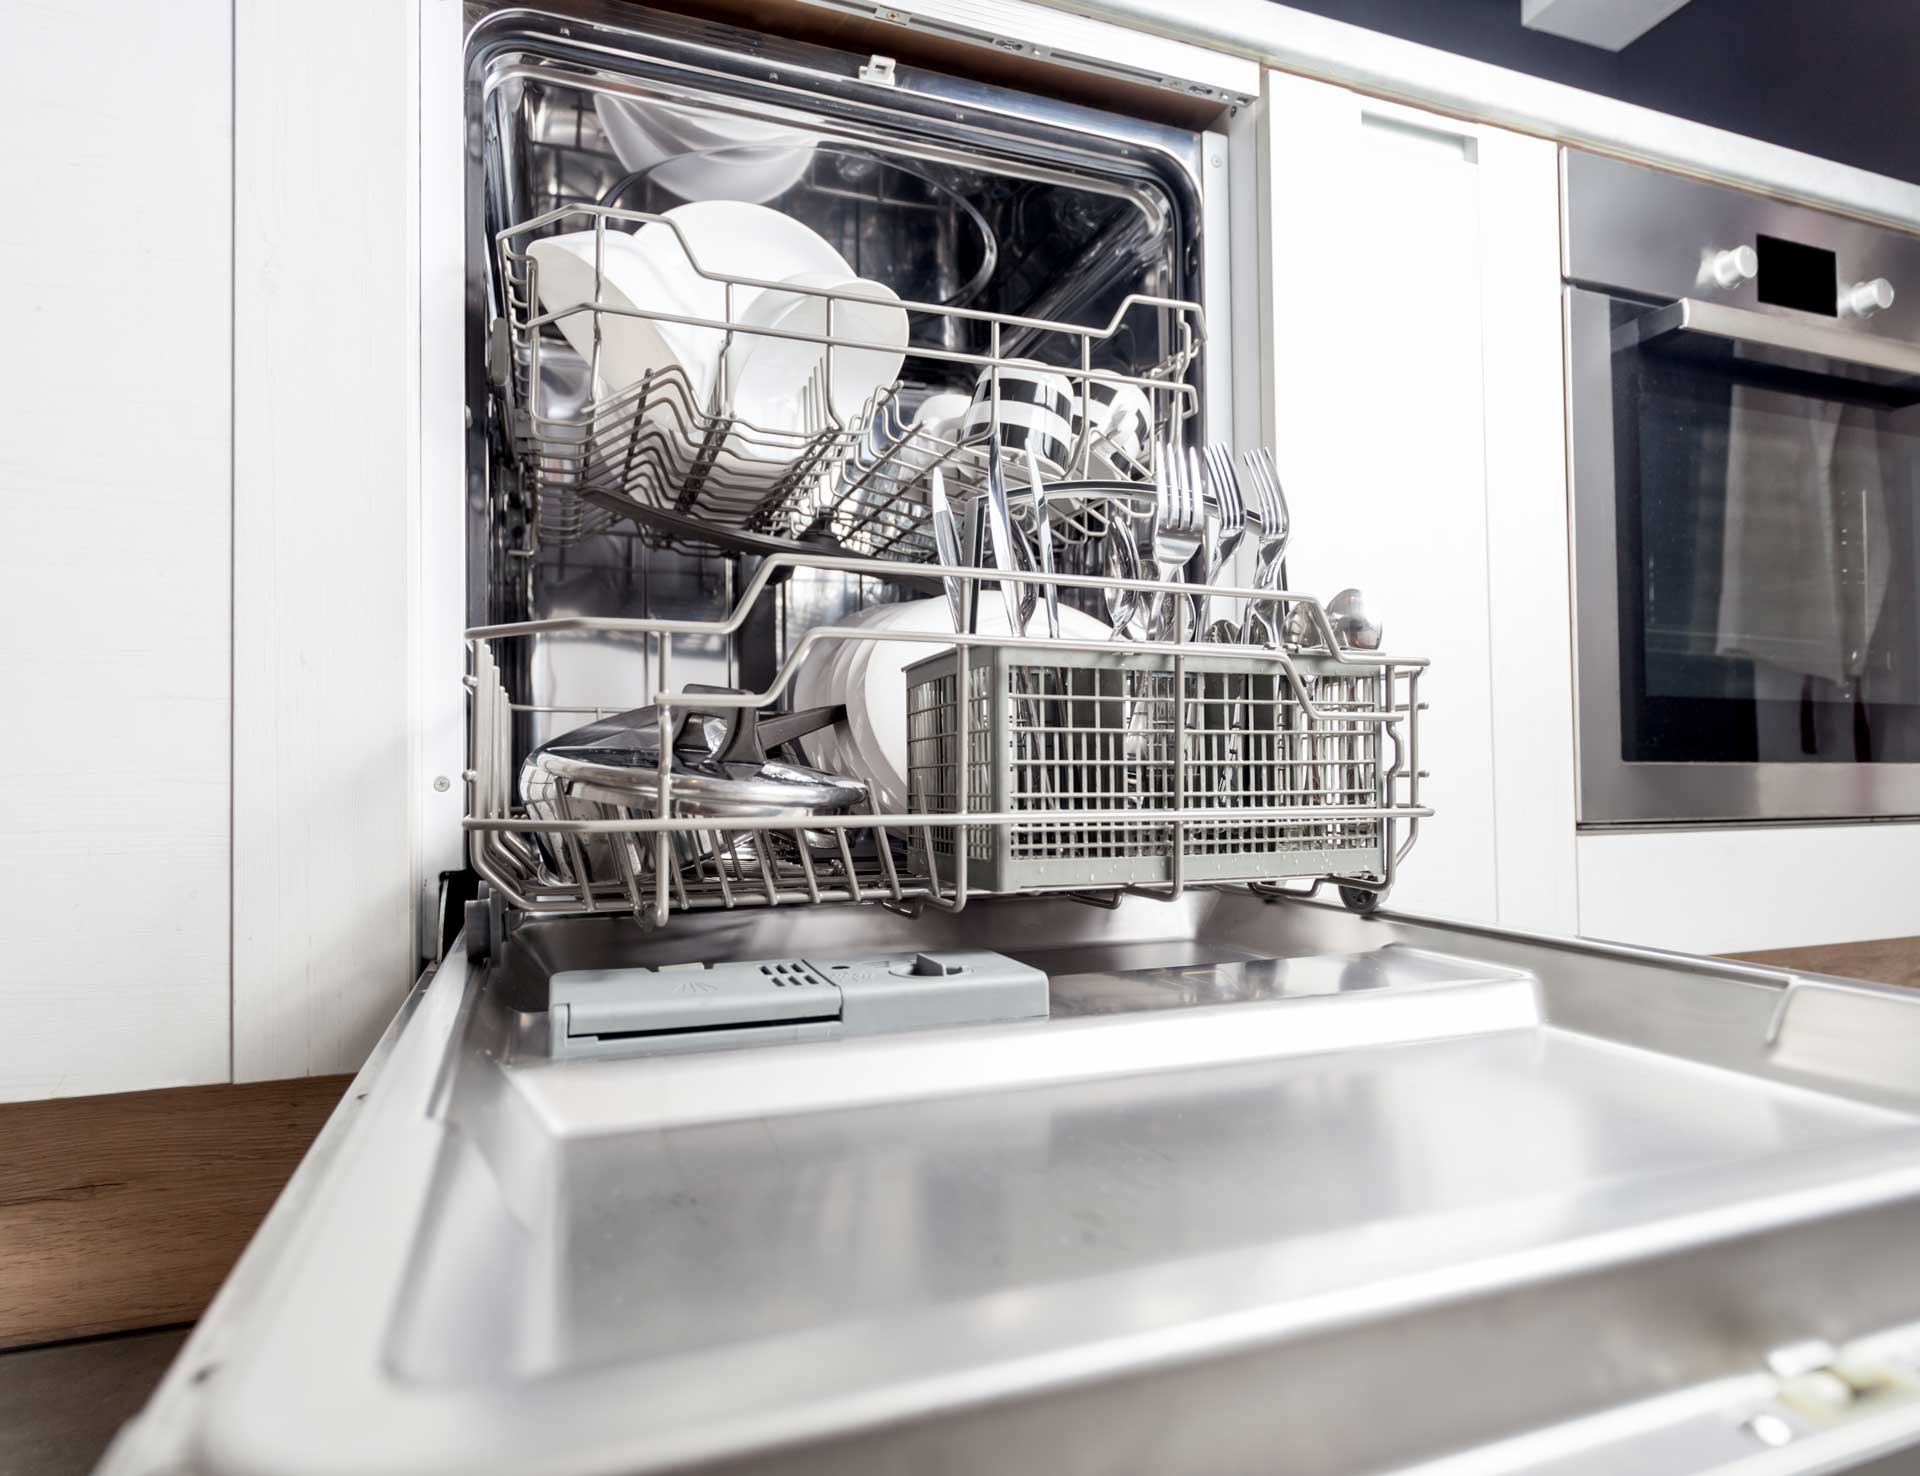 How To Fix A Leaky Dishwasher